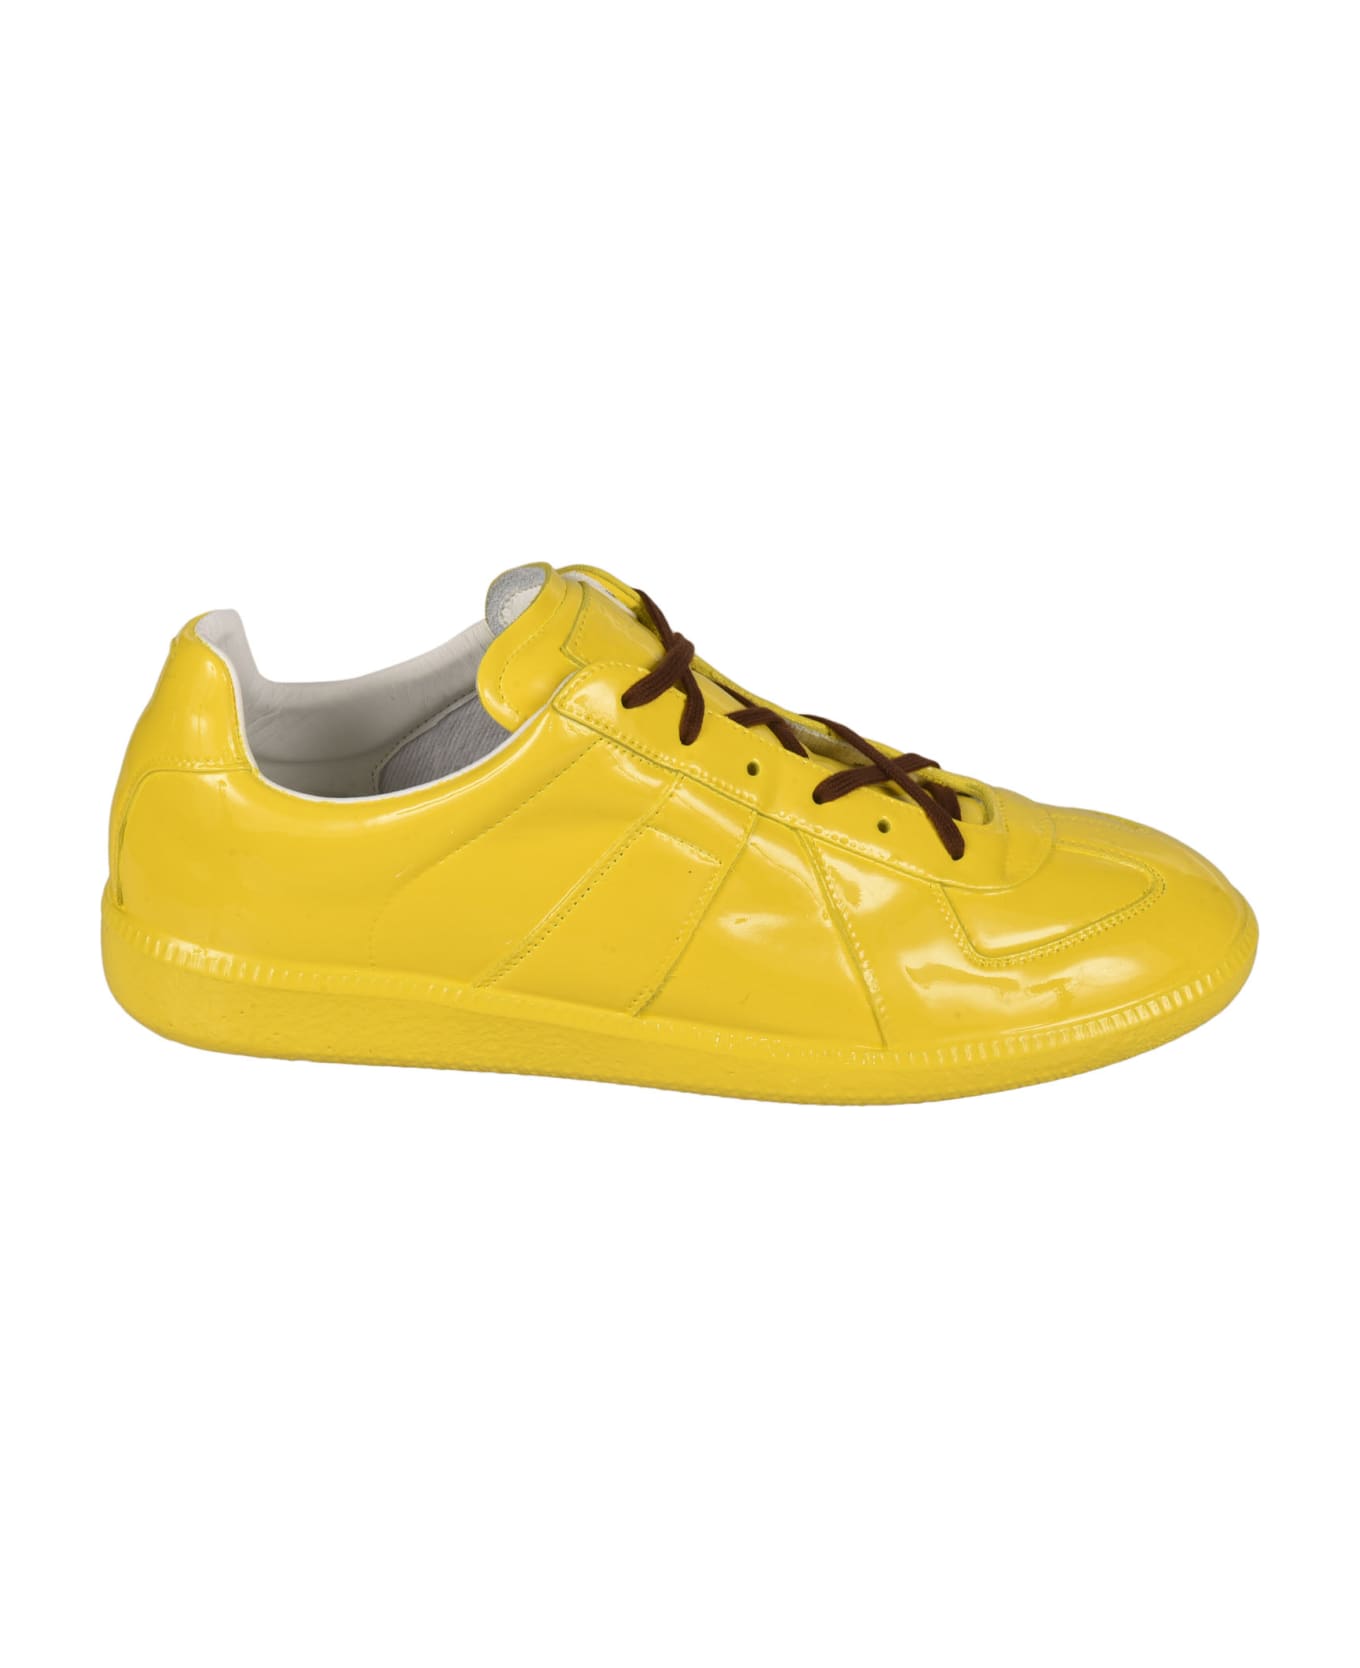 Maison Margiela Glossy Cross-lace Sneakers - Multicolor スニーカー